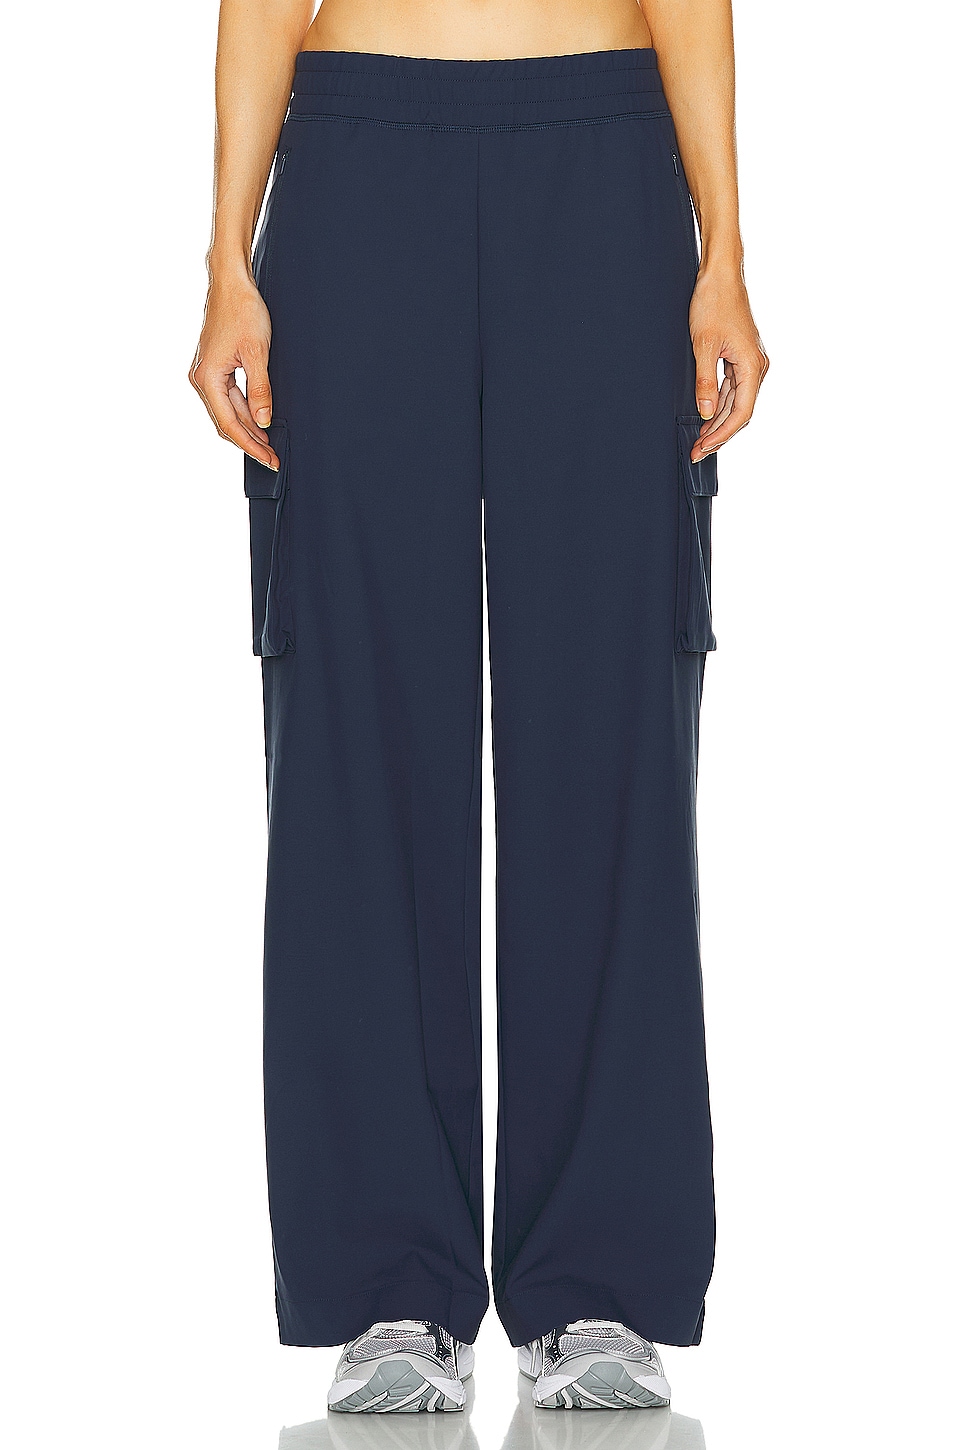 Image 1 of Beyond Yoga City Chic Cargo Pant in Nocturnal Navy